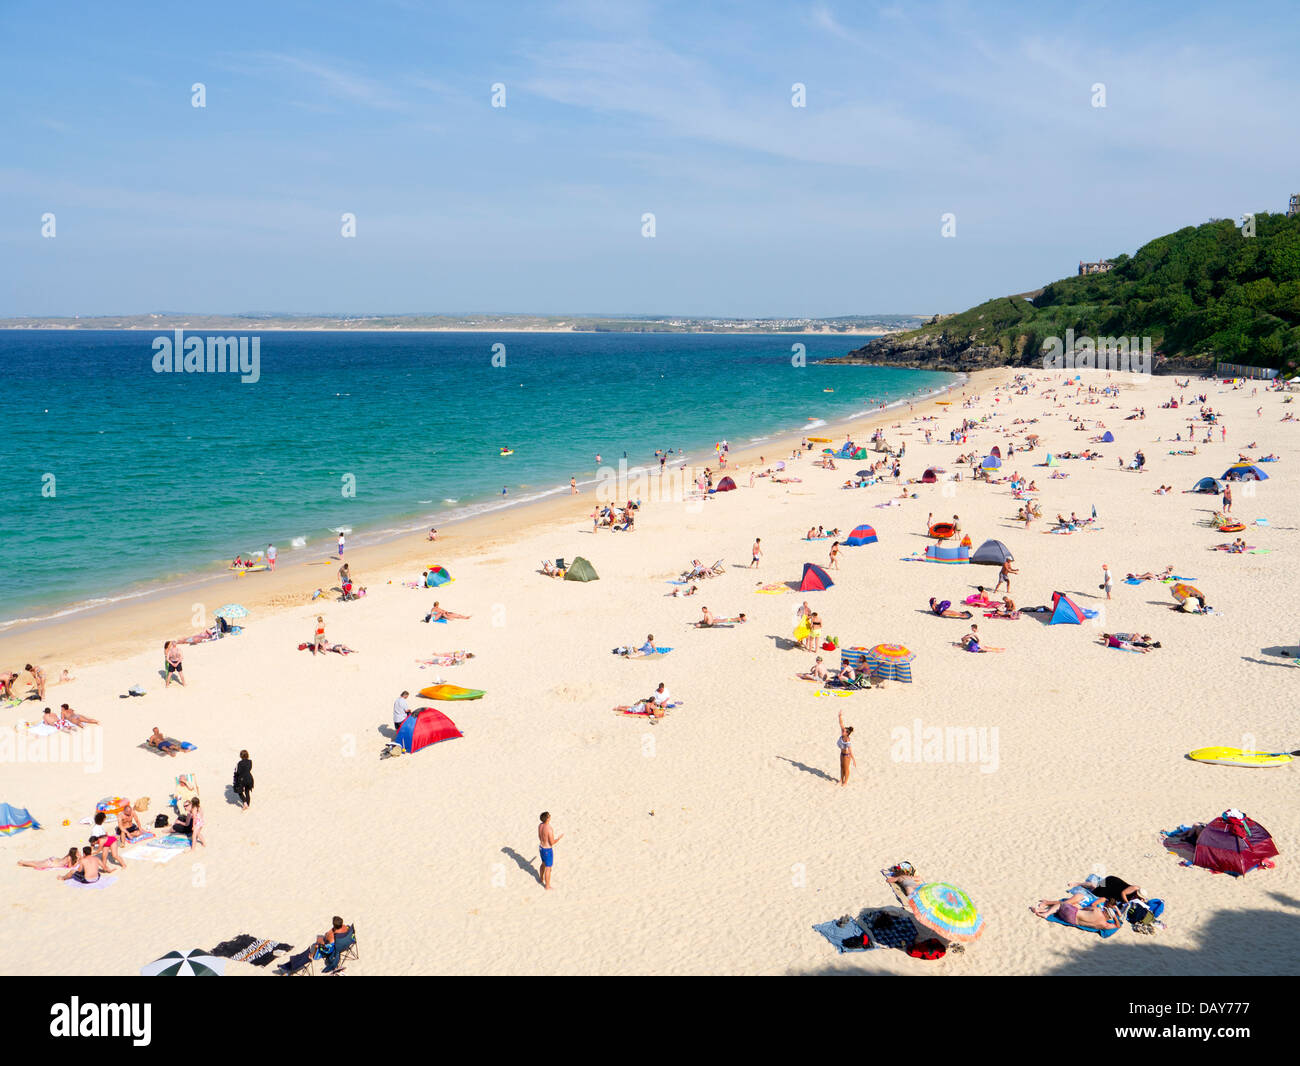 Porthminster Beach in St. Ives, Cornwall England.  Popular Cornish sandy beach on a summers day. Stock Photo